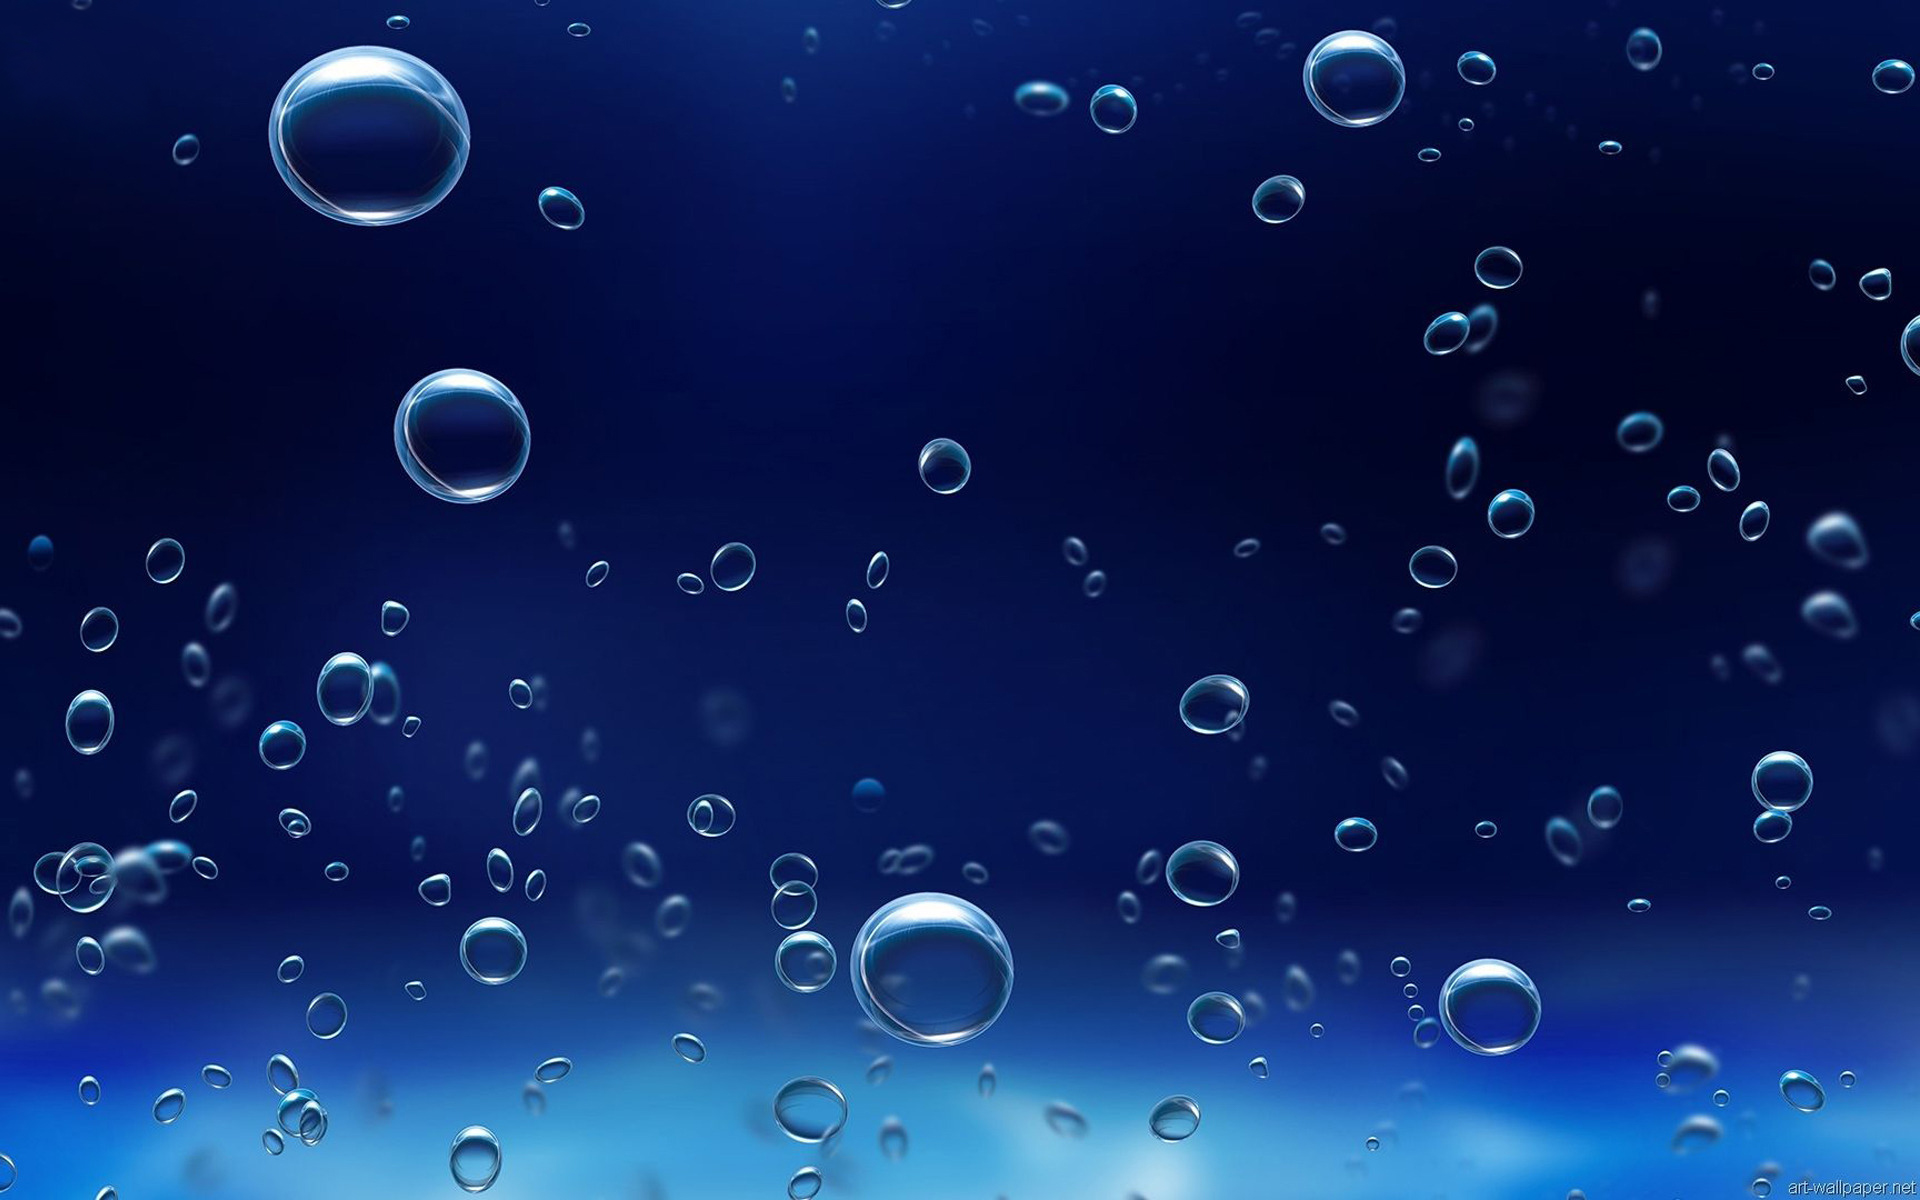 Free Underwater Bubbles Backgrounds For PowerPoint - Miscellaneous ...